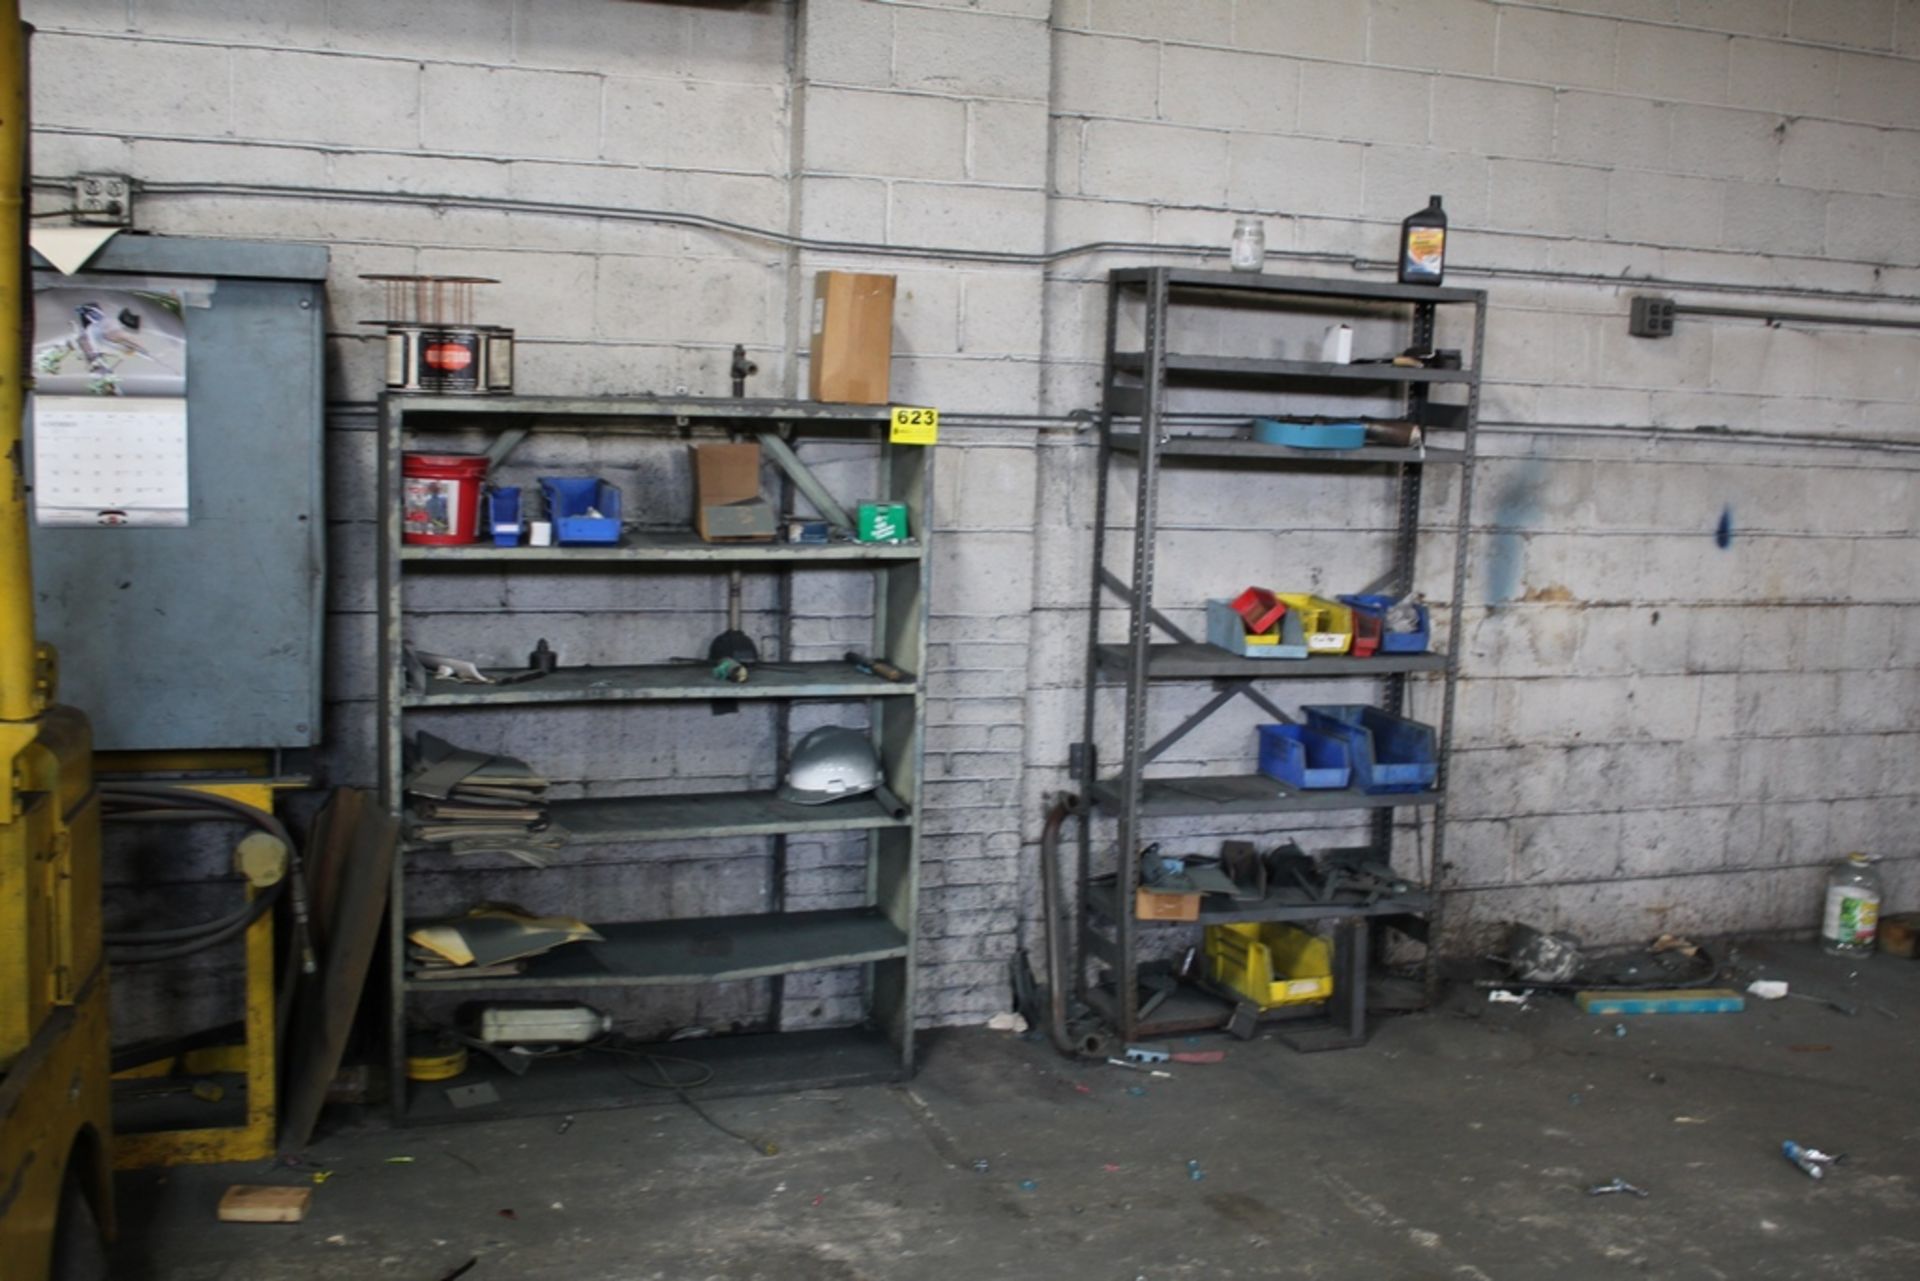 (2) SECTION STEEL SHELVING WITH CONTENTS